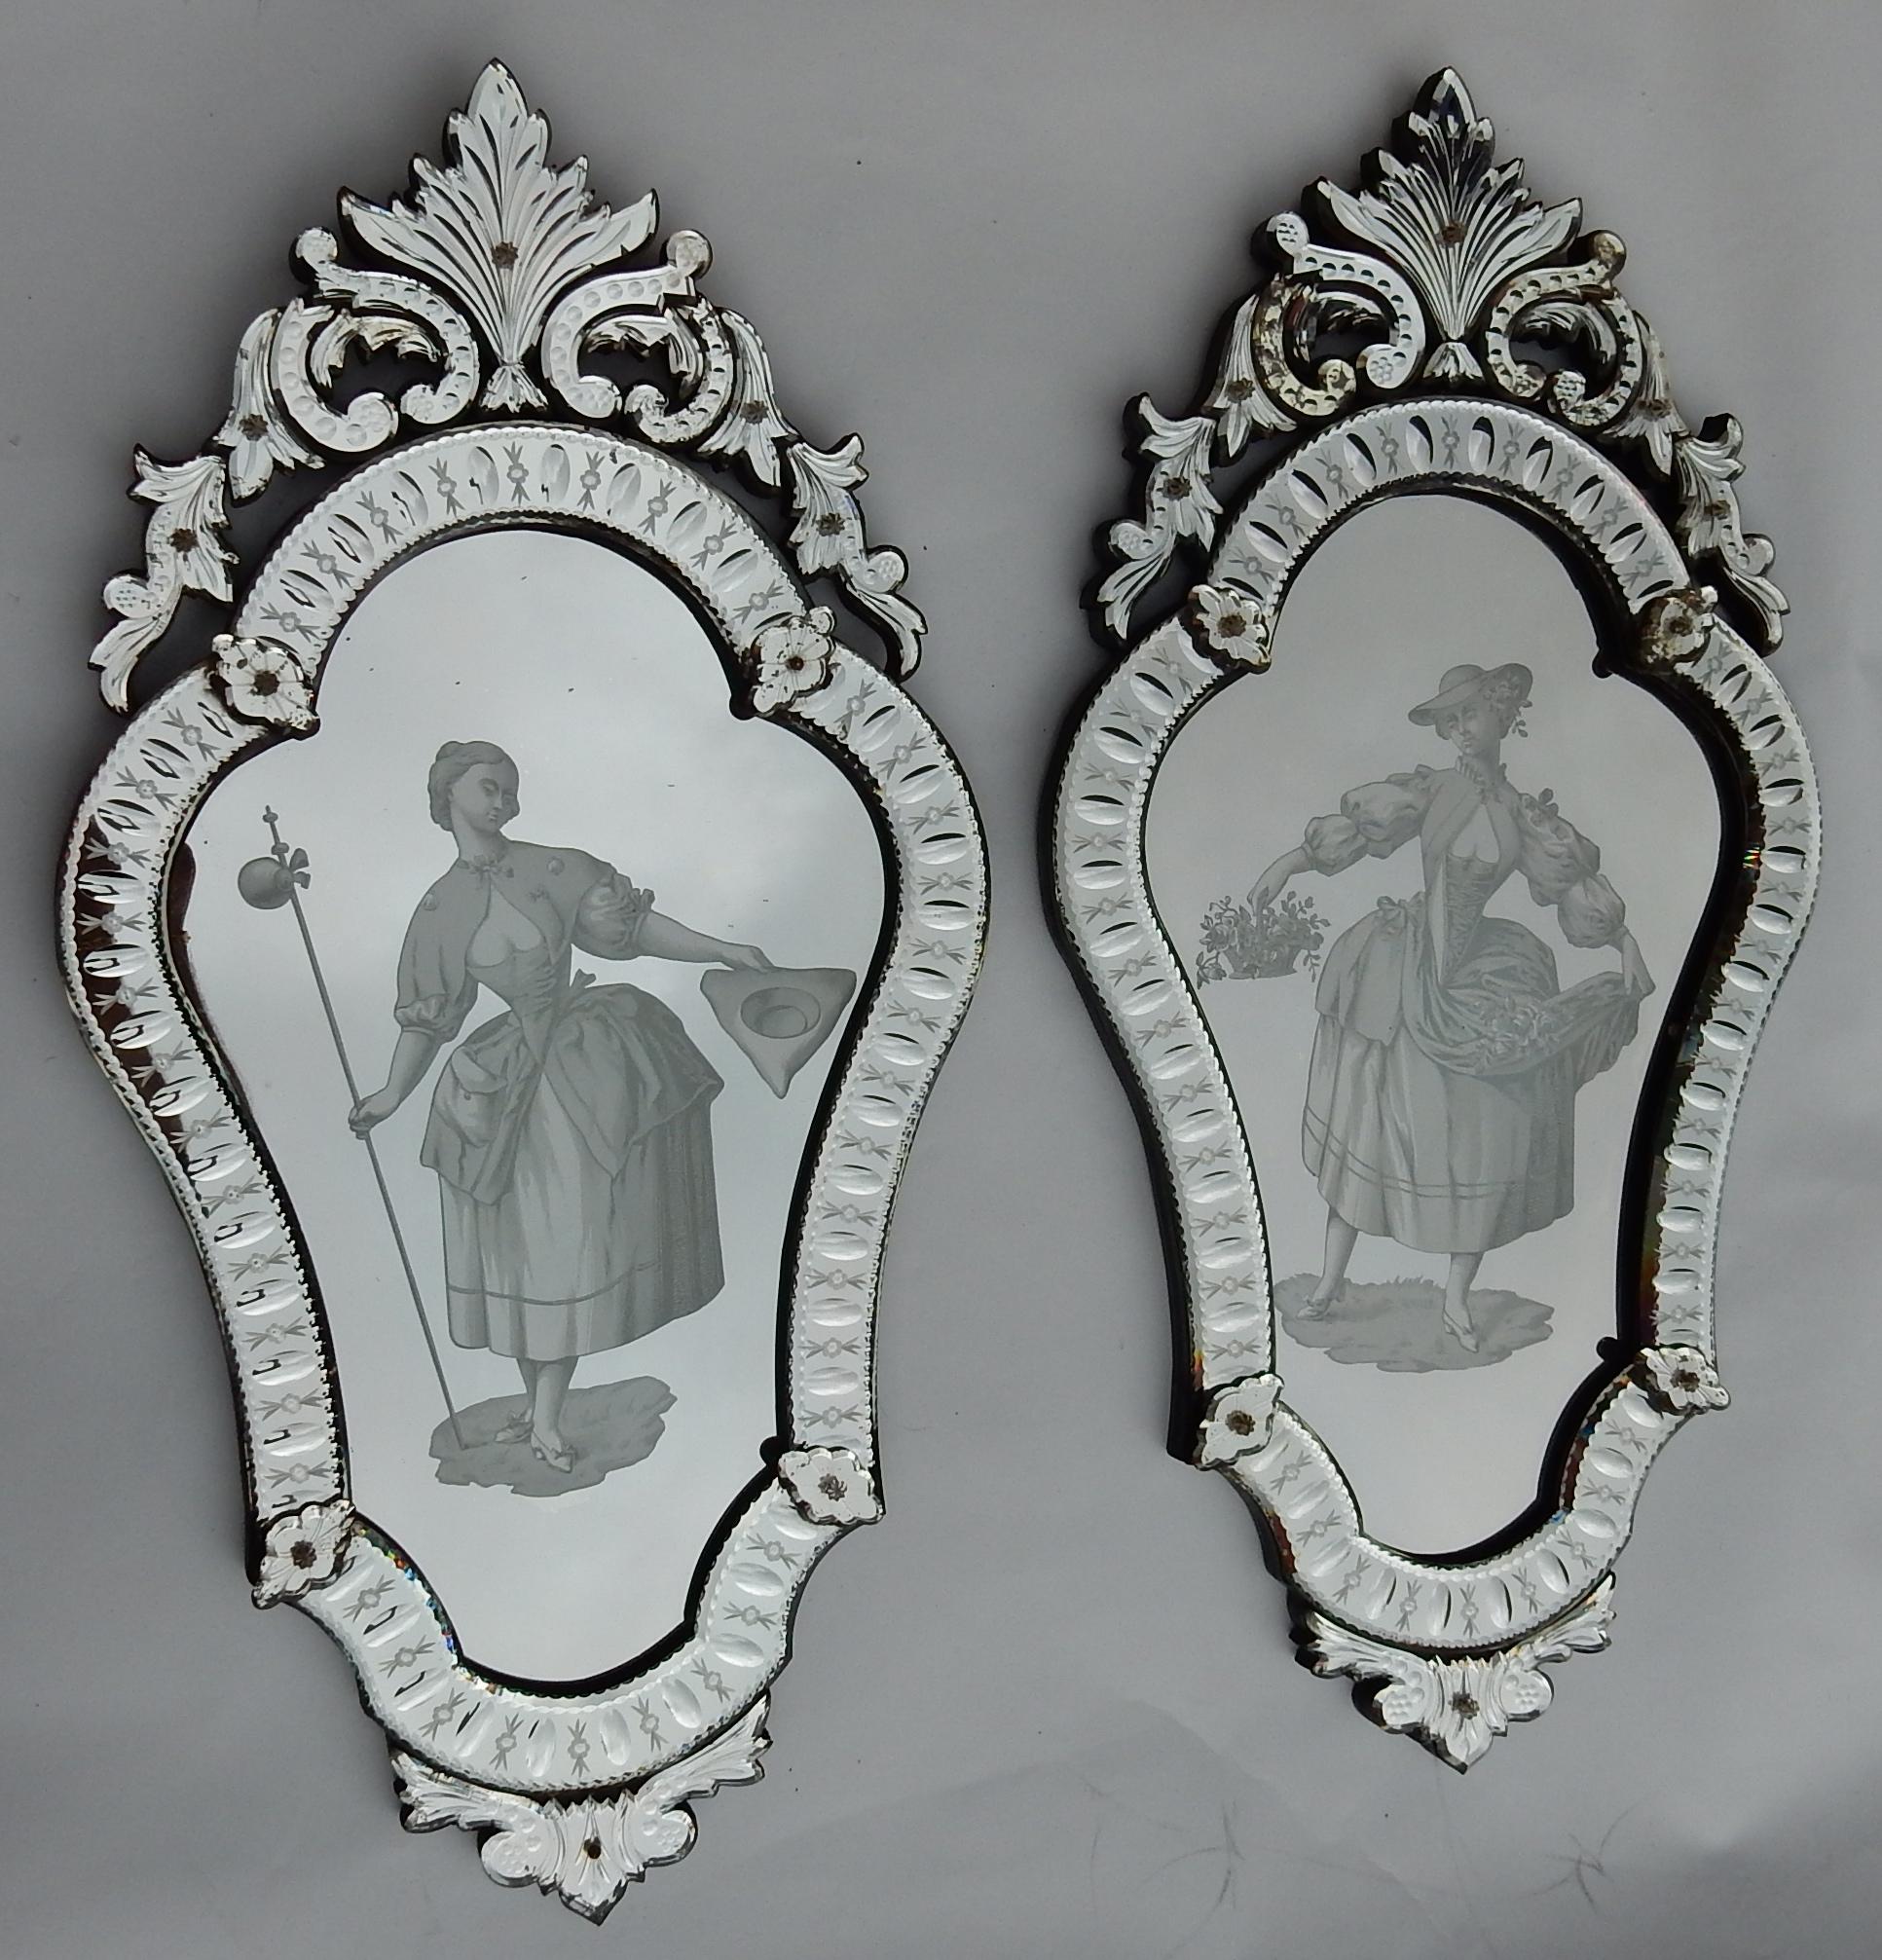 Pair of Venetian mirrors with elegant women decor in glass under setting, circa 1940, good condition.